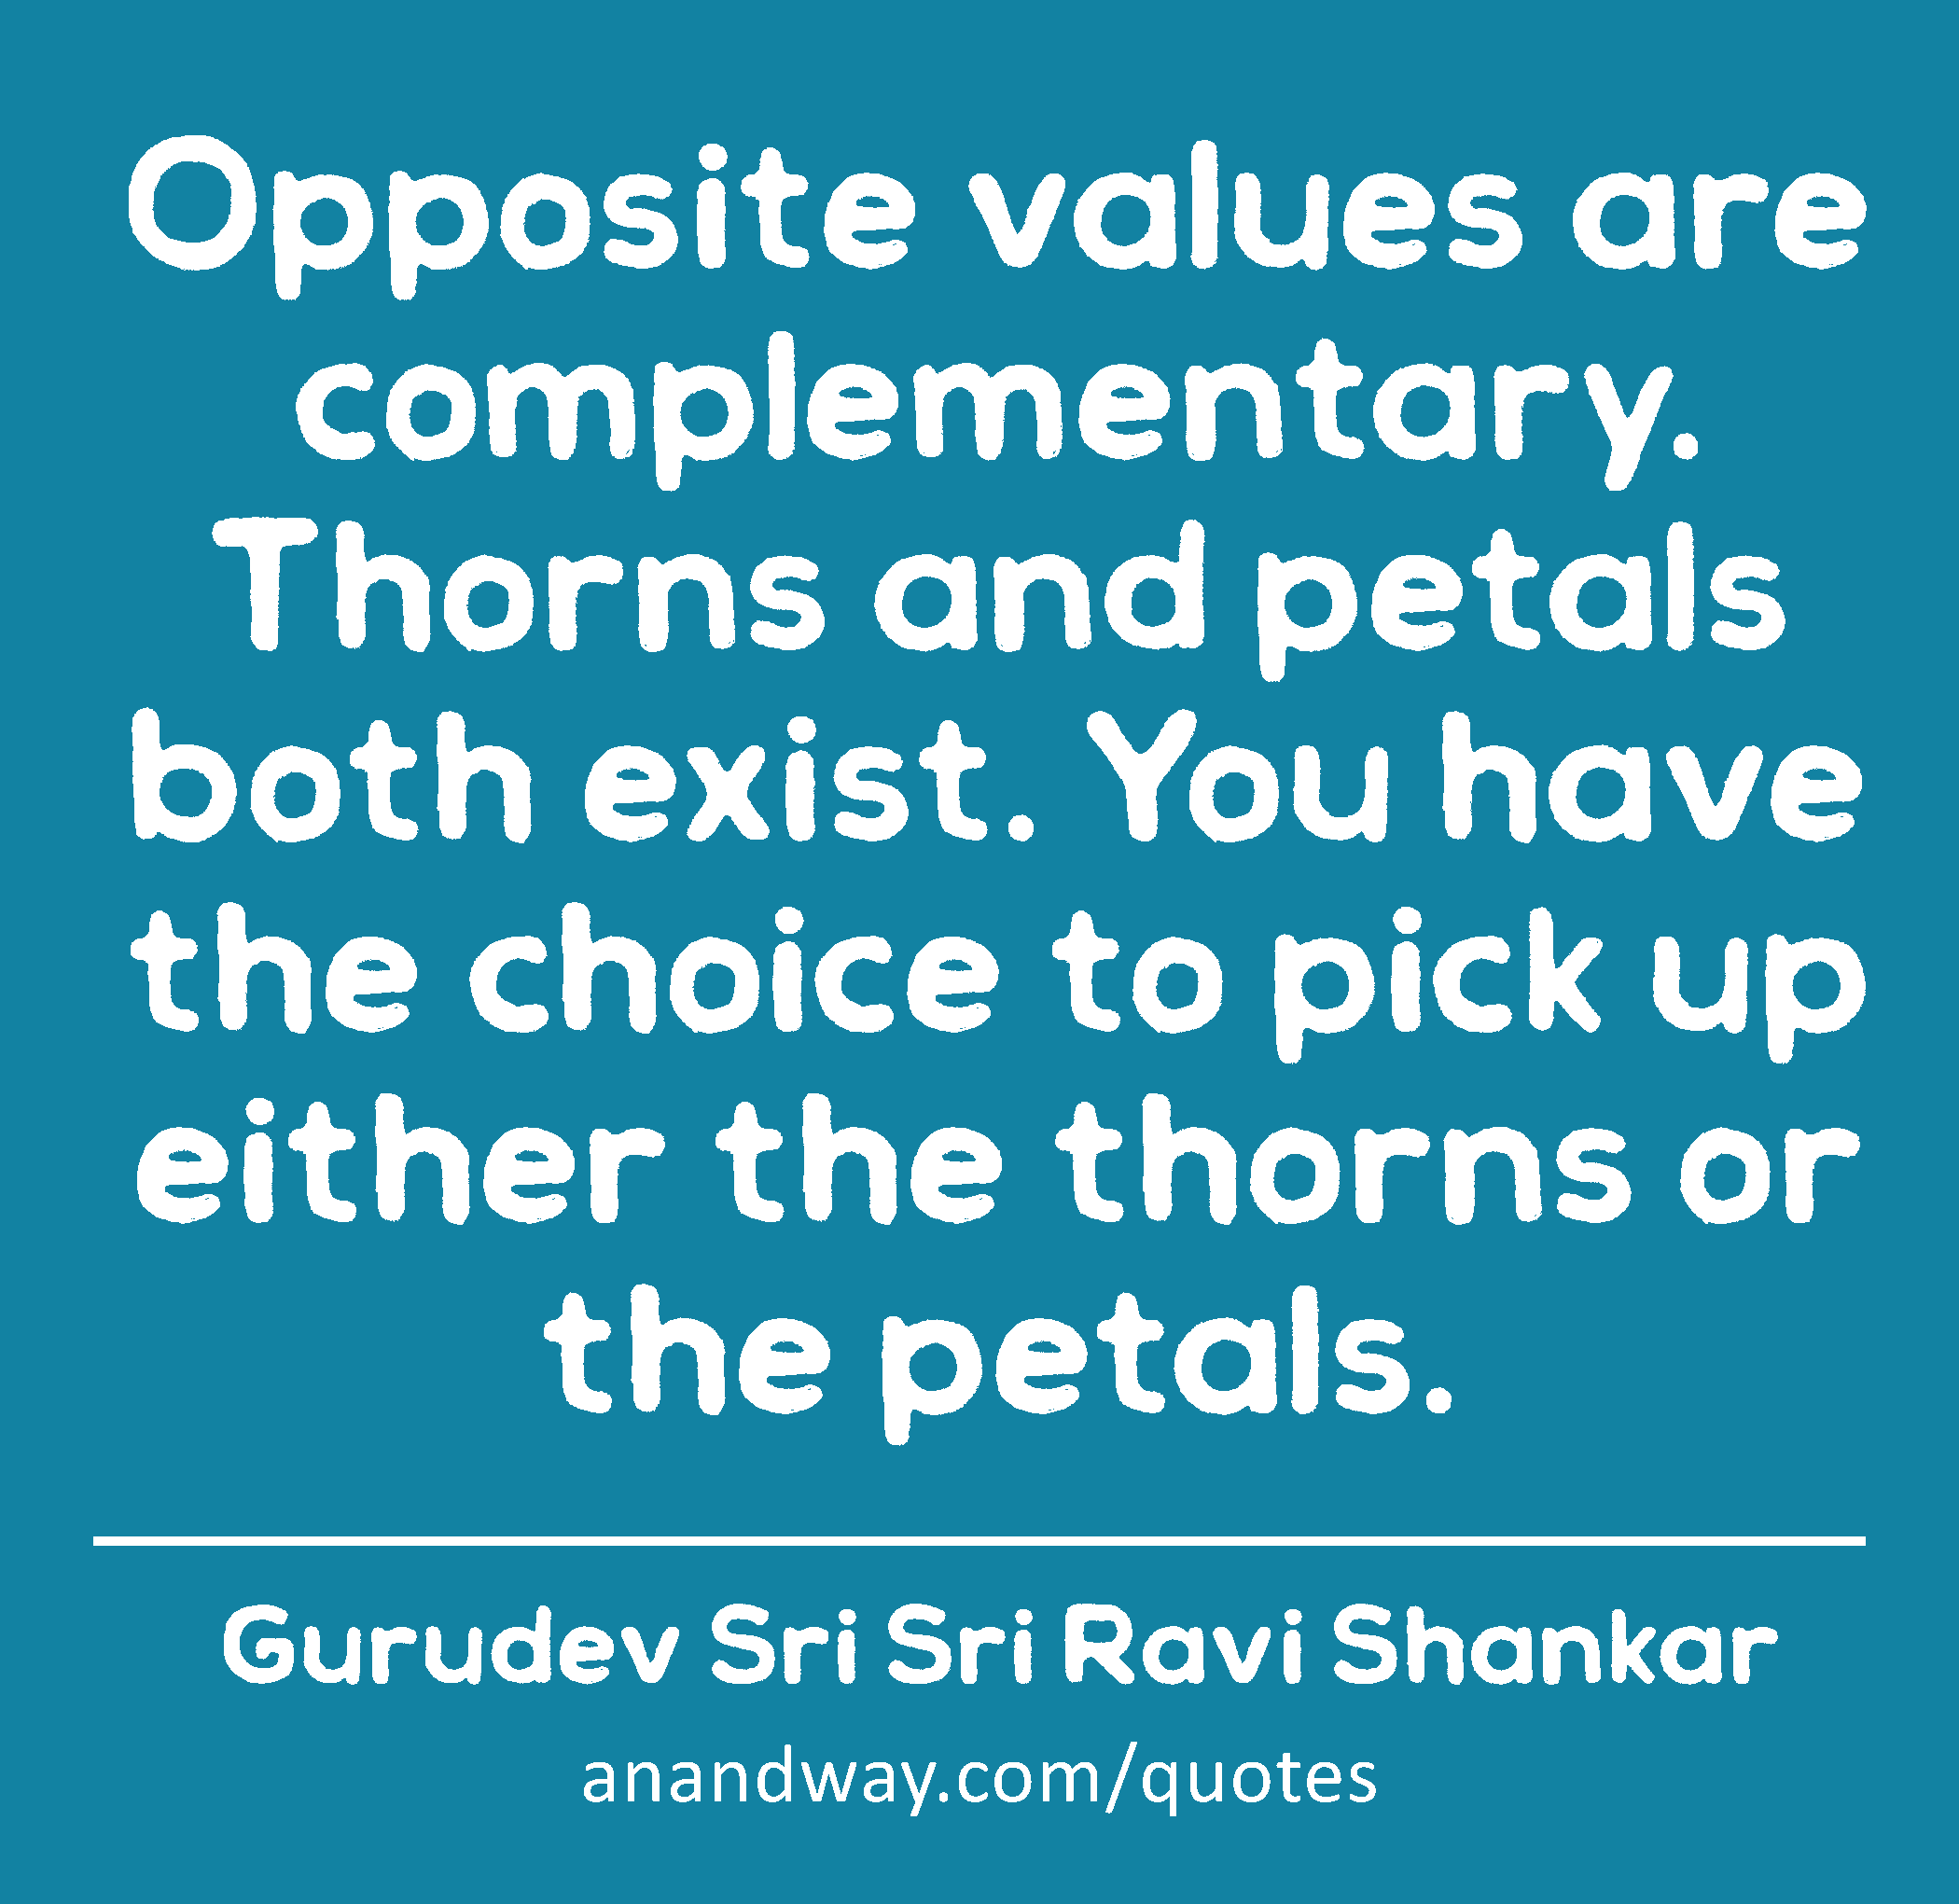 Opposite values are complementary. Thorns and petals both exist. You have the choice to pick up
 -Gurudev Sri Sri Ravi Shankar